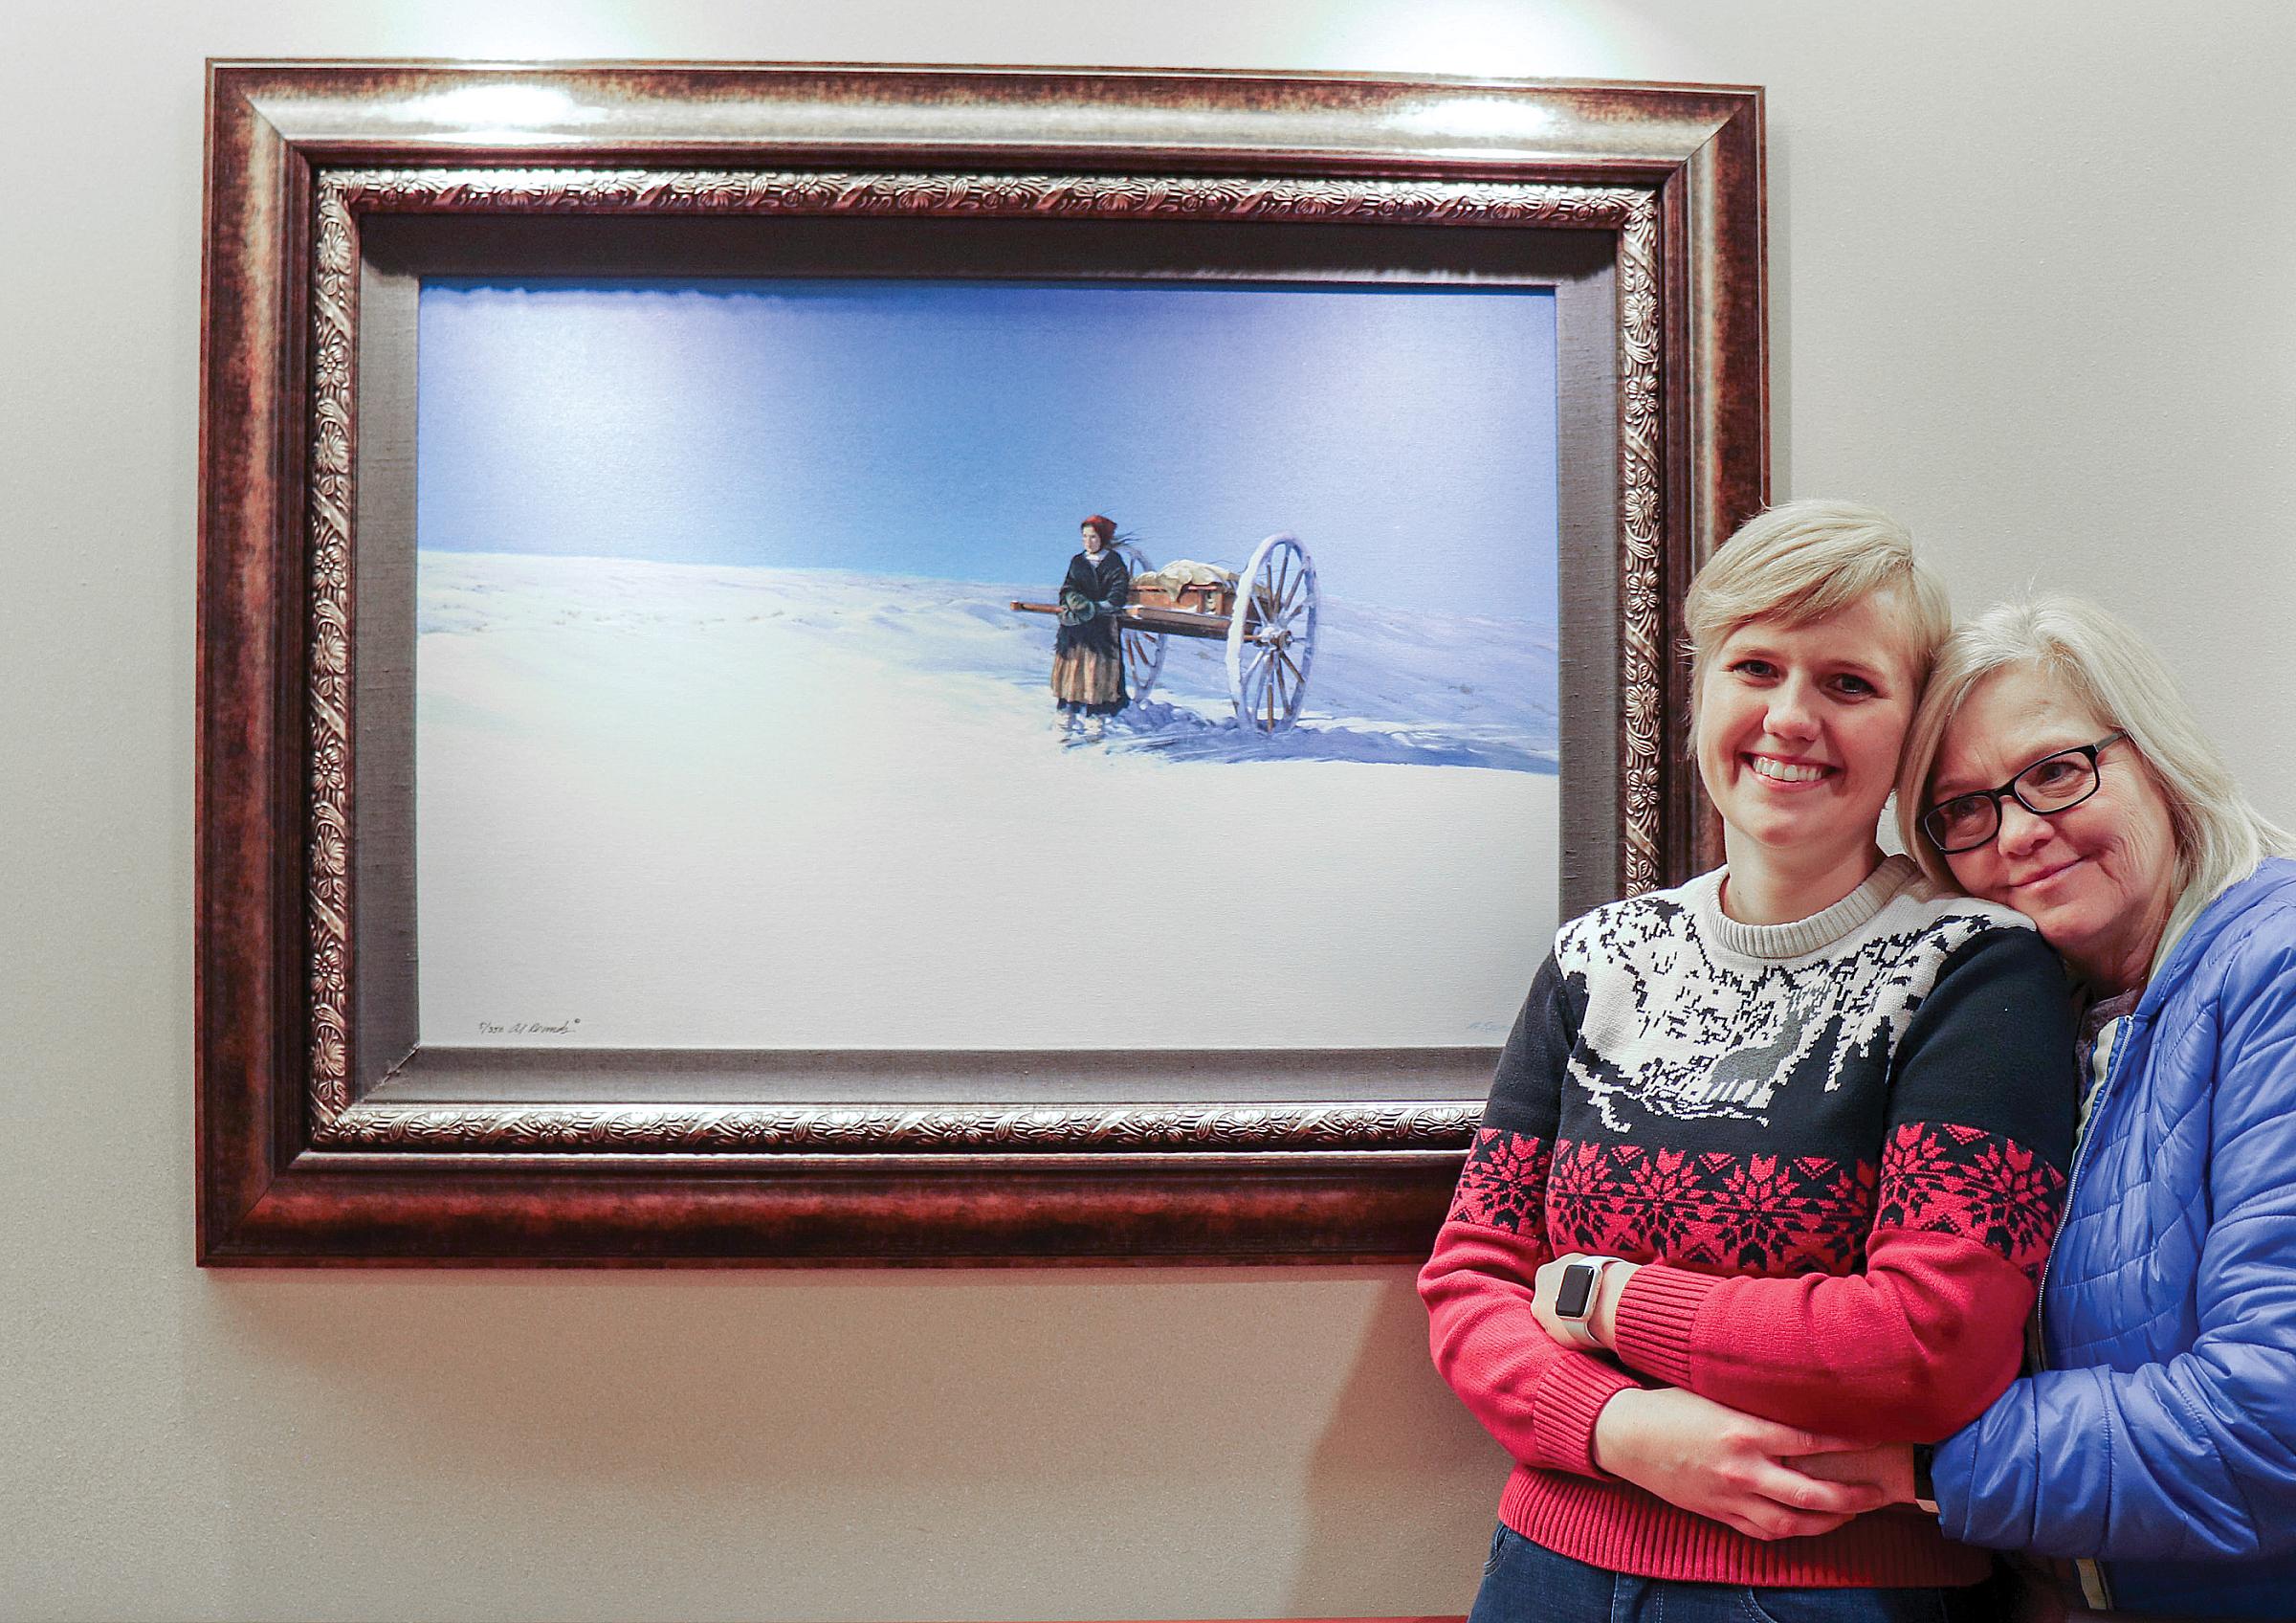 Emma Wageman (left) and her mother standing in front of "Trial of Hope...Last Hill" by artist Al Rounds, located on the fourth floor of the cancer hospital.